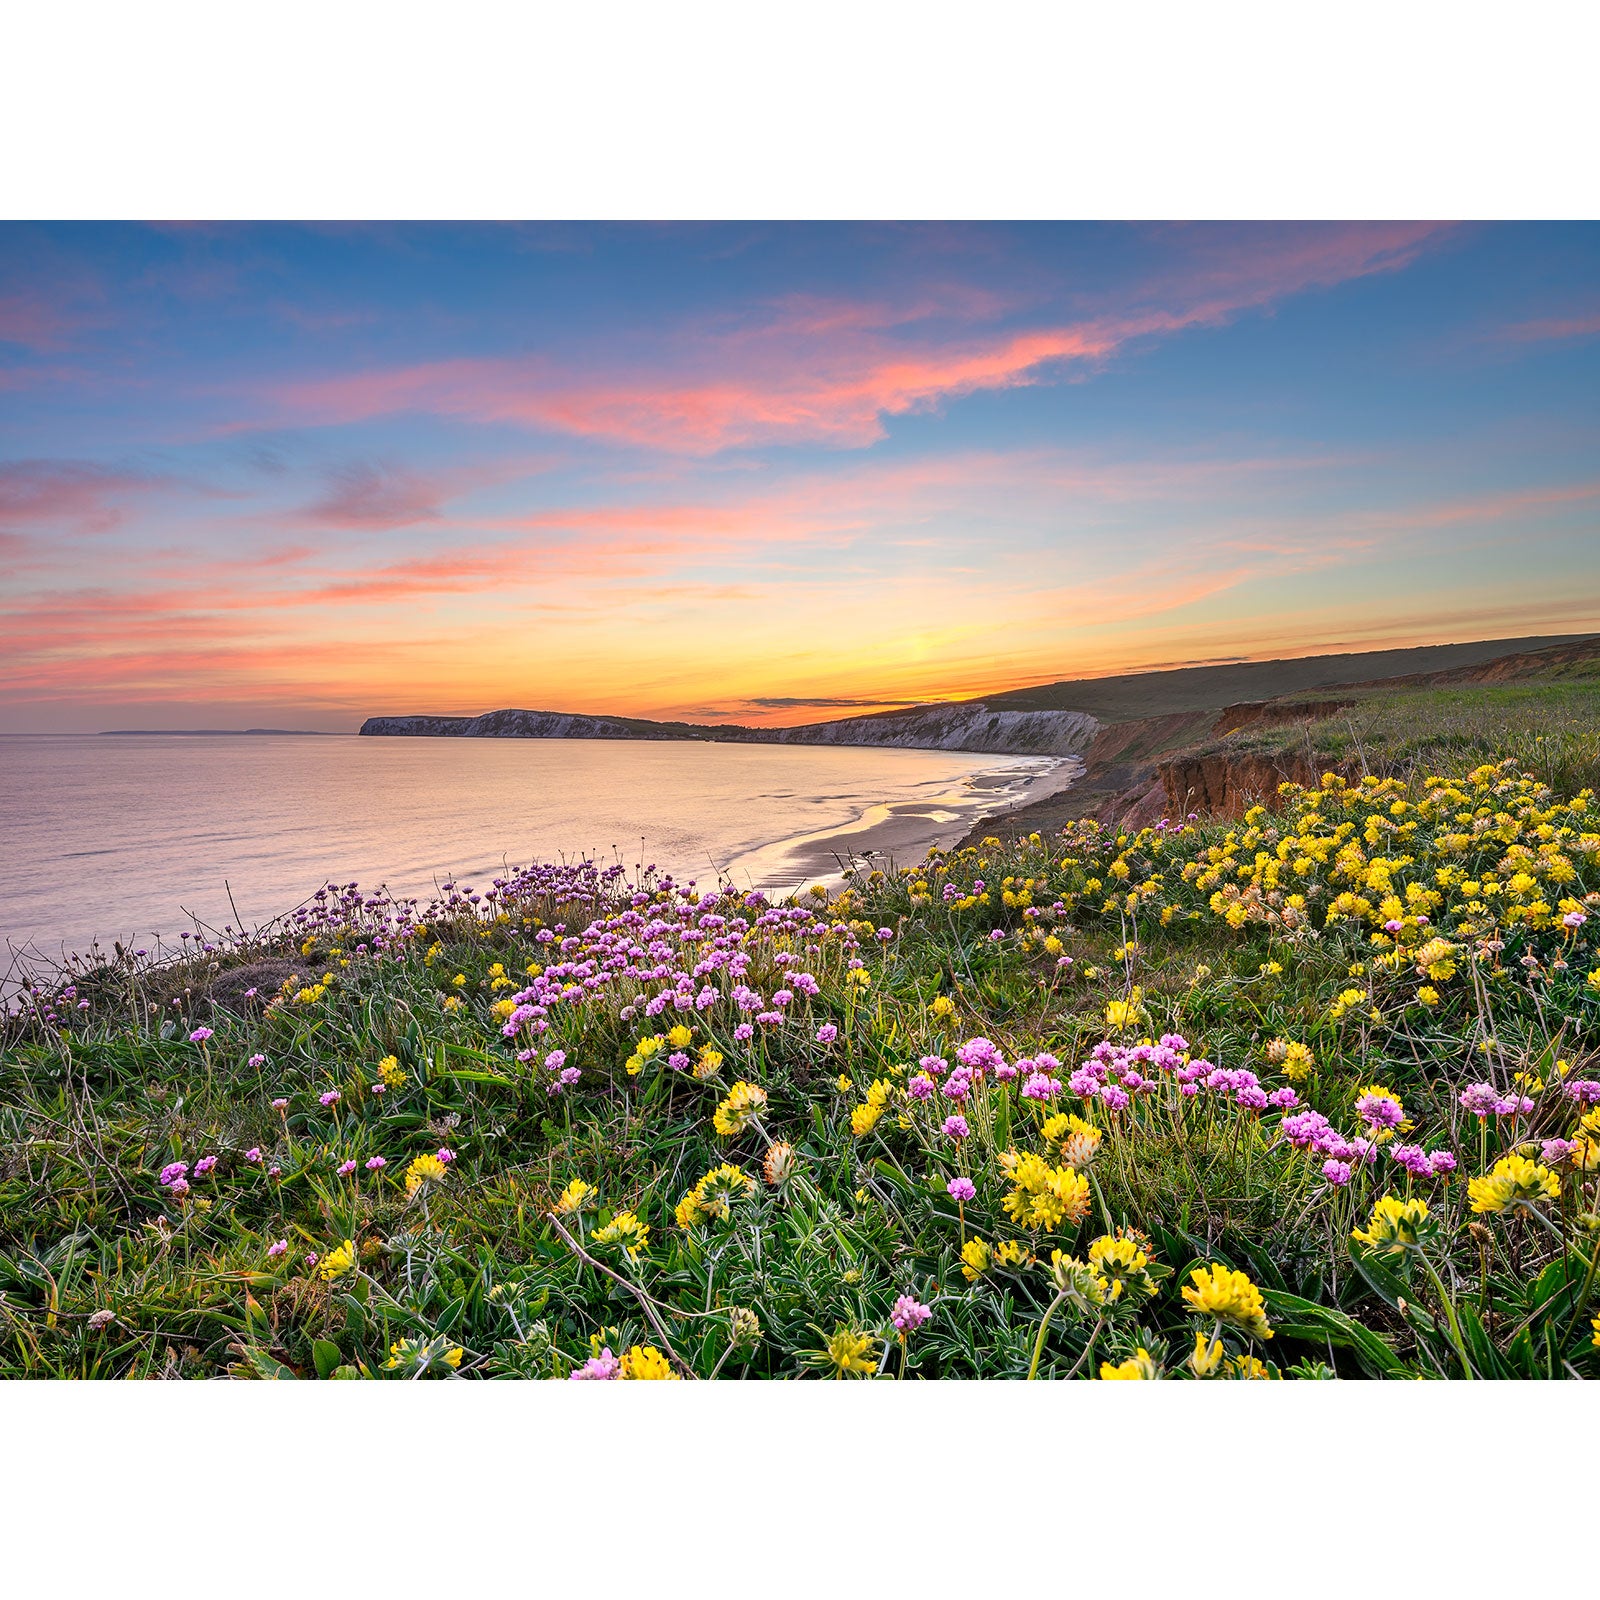 Coastal sunset on the Isle of Wight with Pink Thrift wildflowers in the foreground, captured by Available Light Photography.